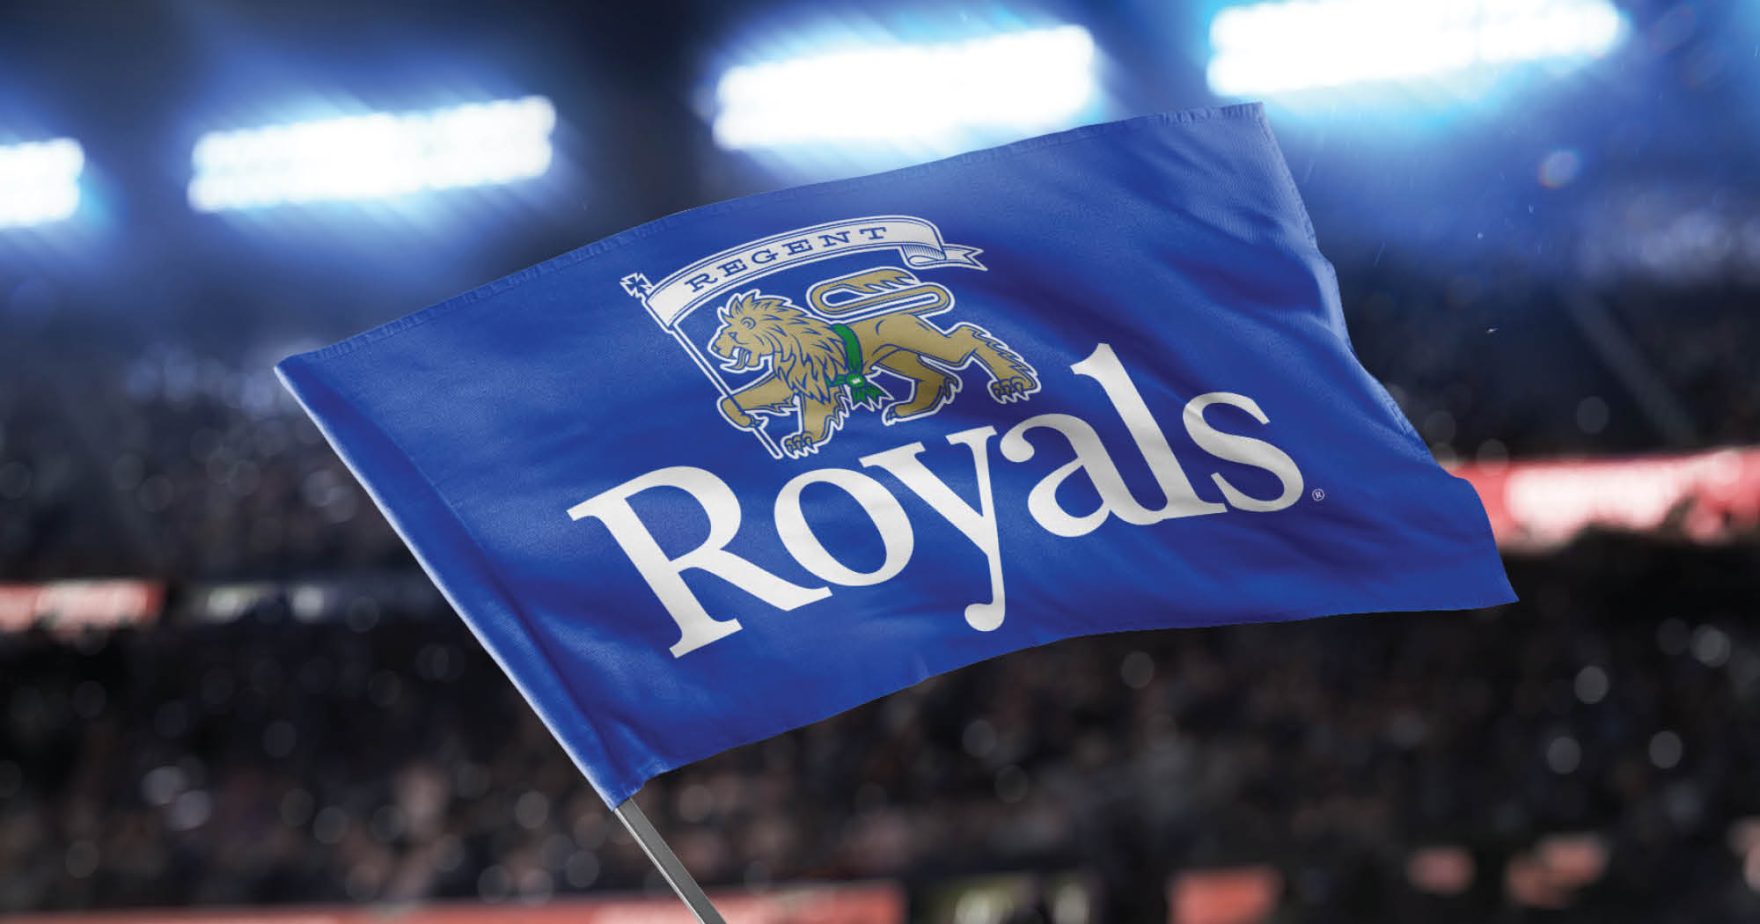 A Regent Royals flag: The Virginia Beach university appointed a new athletics director.